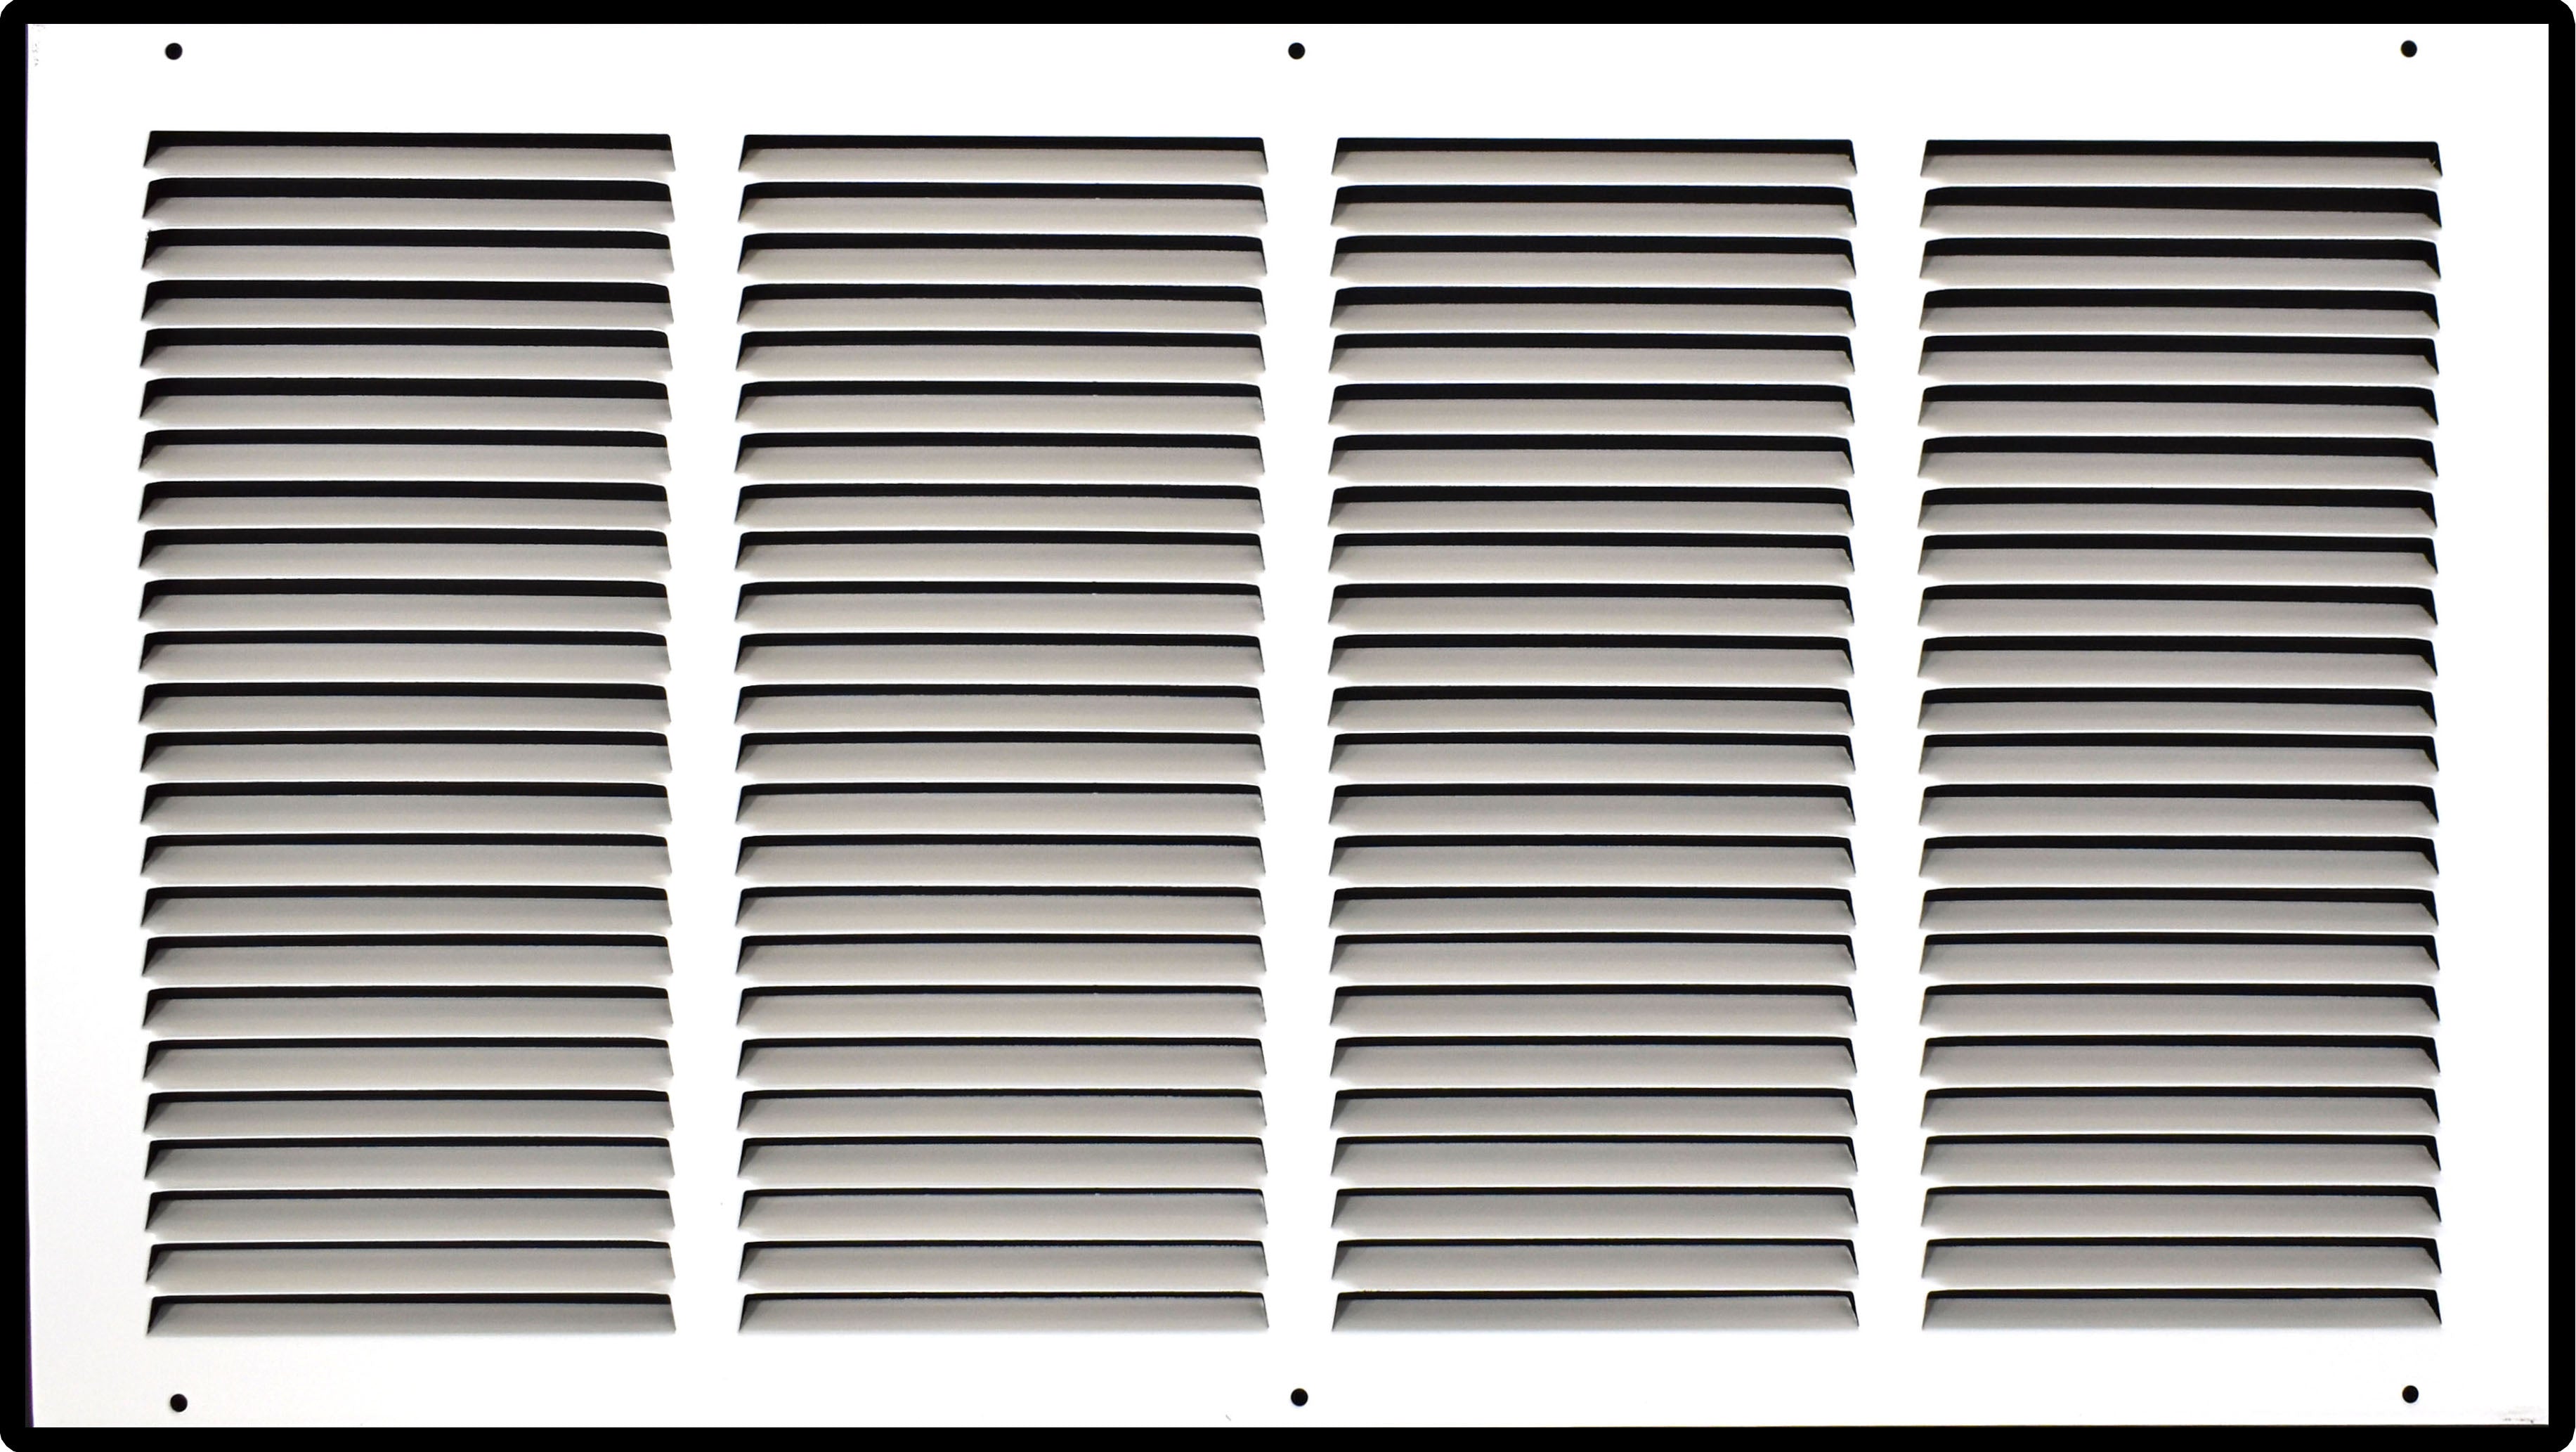 airgrilles 24" x 12" duct opening   hd steel return air grille for sidewall and ceiling  agc  7agc-flt-wh-24x12 756014649635 - 1